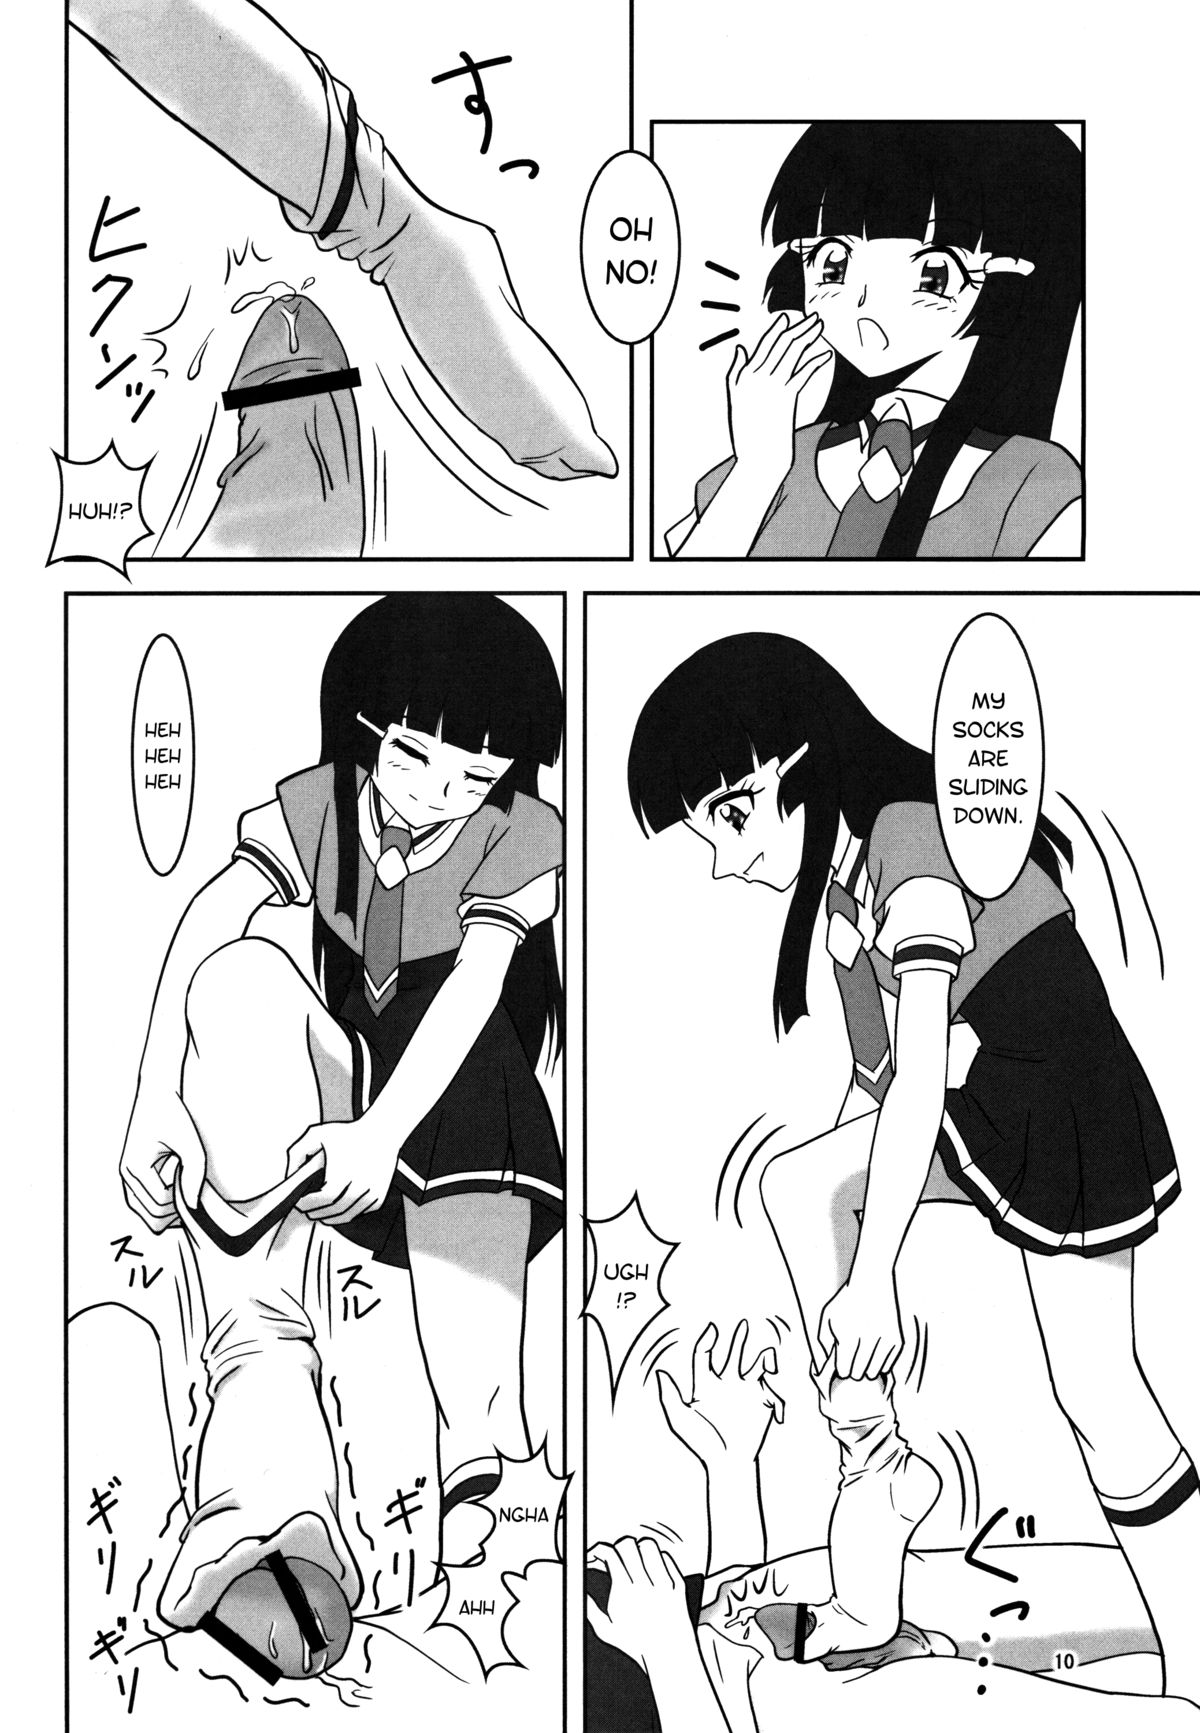 (C82) [AFJ (Ashi_O)] Smell Zuricure | Smell Footycure (Smile Precure!) [English] page 11 full